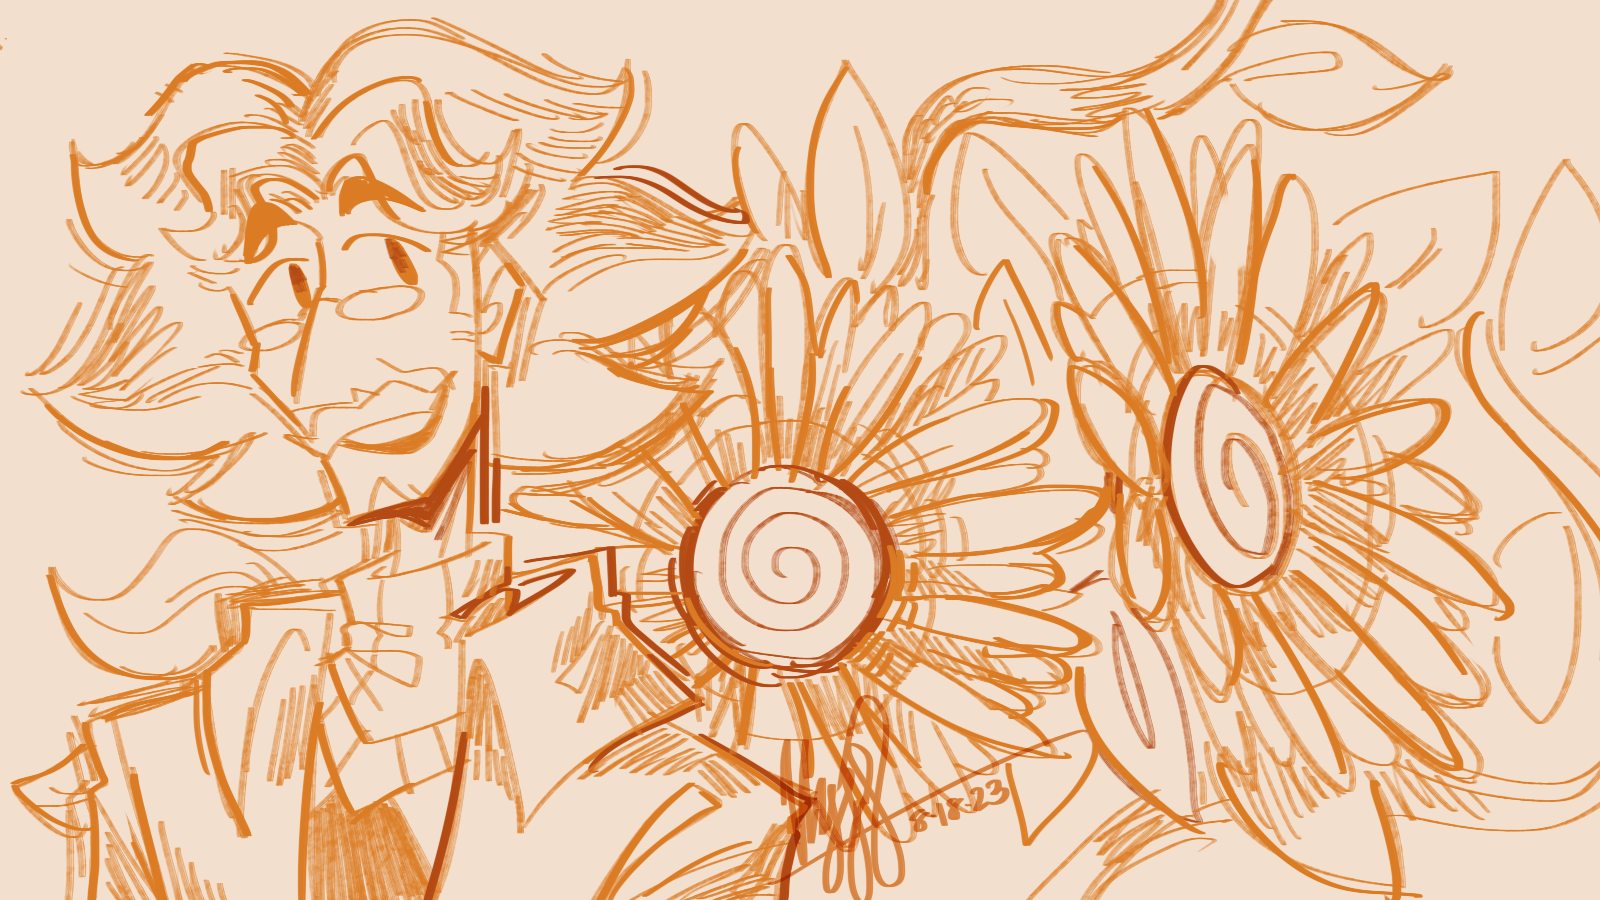 Sketchy Dr. Sunshine with sunflowers, light version